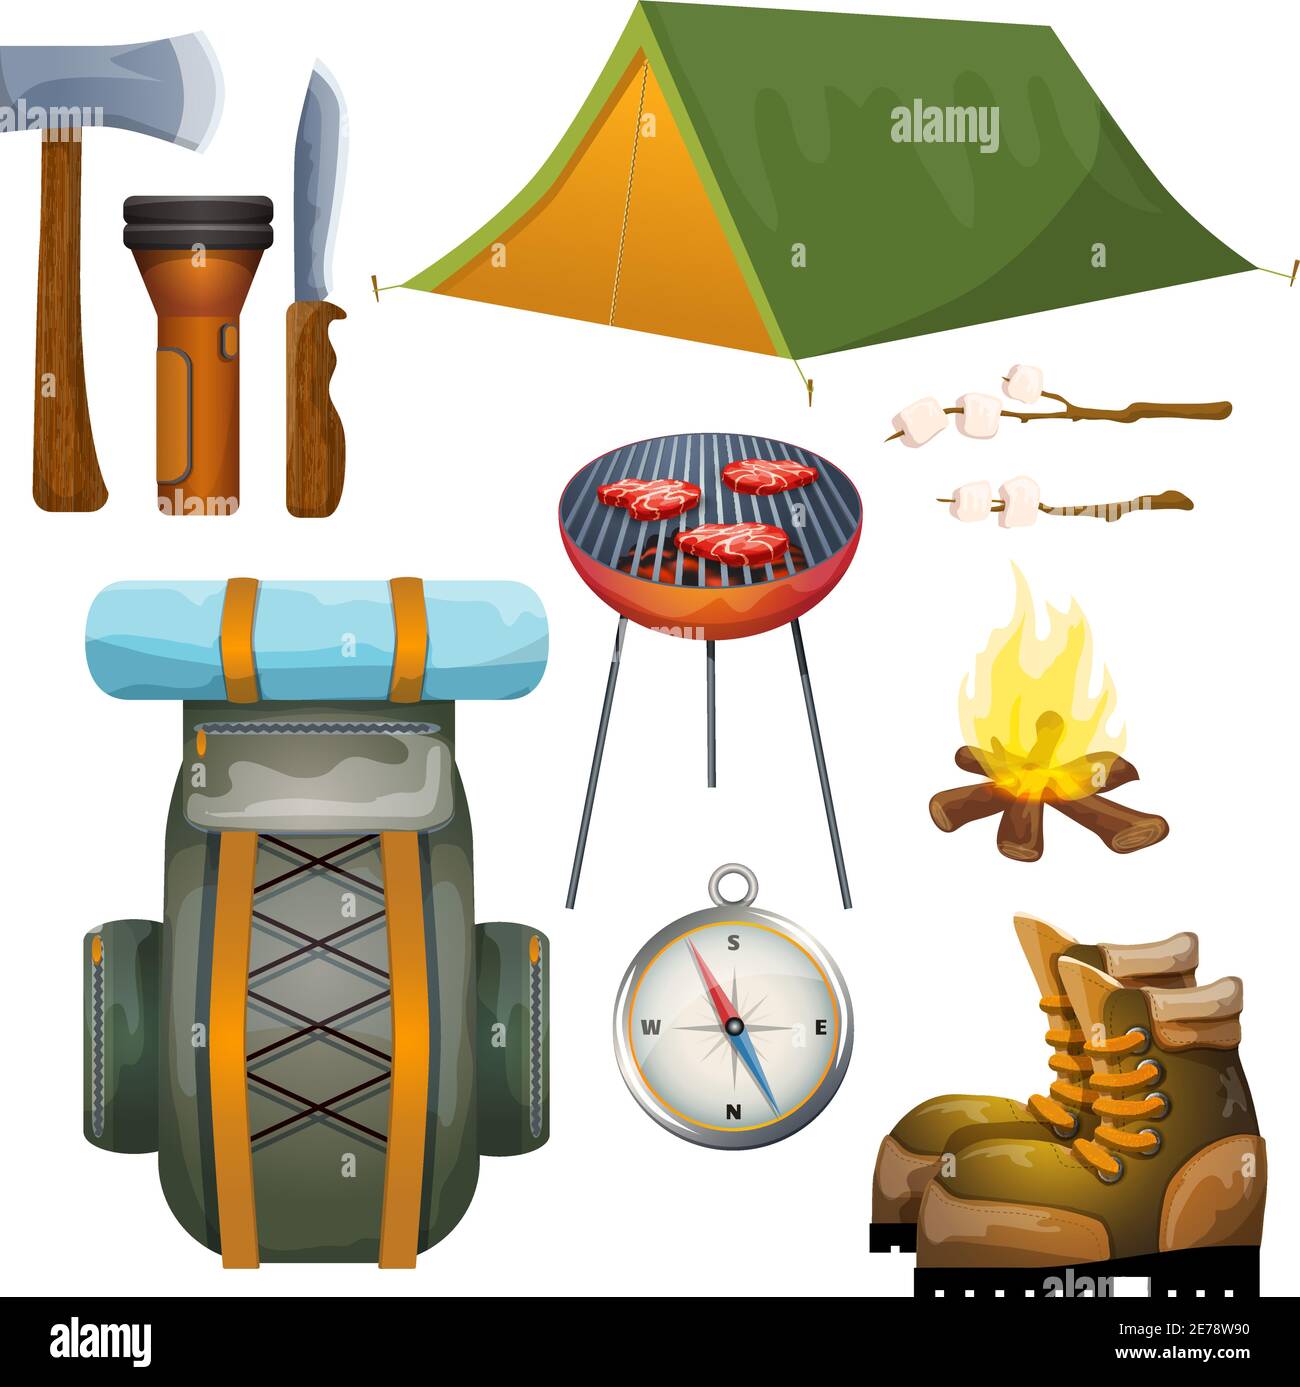 https://c8.alamy.com/comp/2E78W90/summer-vacation-outdoor-camping-gear-and-accessories-pictograms-collection-with-backpack-and-campfire-fuel-abstract-vector-illustration-2E78W90.jpg